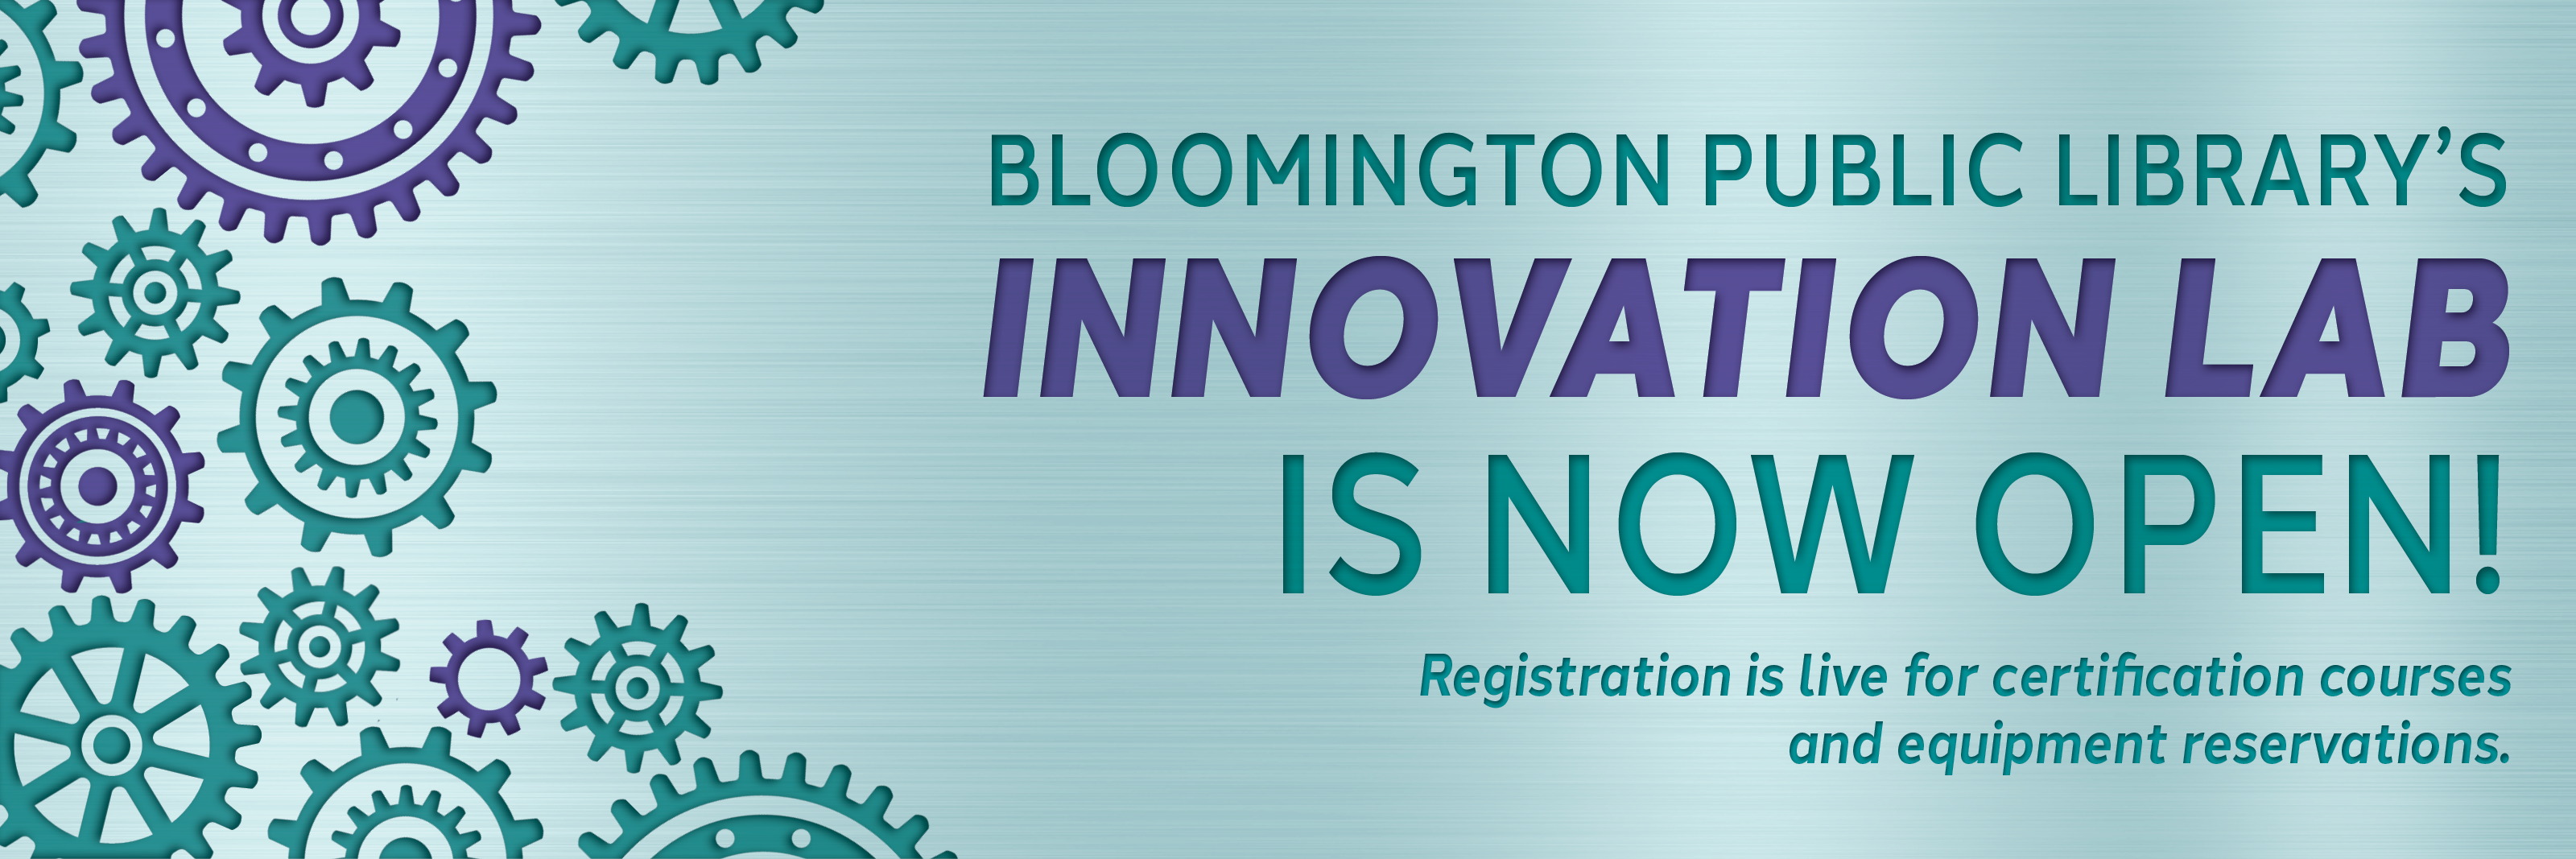 Bloomington Library Innovation Lab is Now Open!